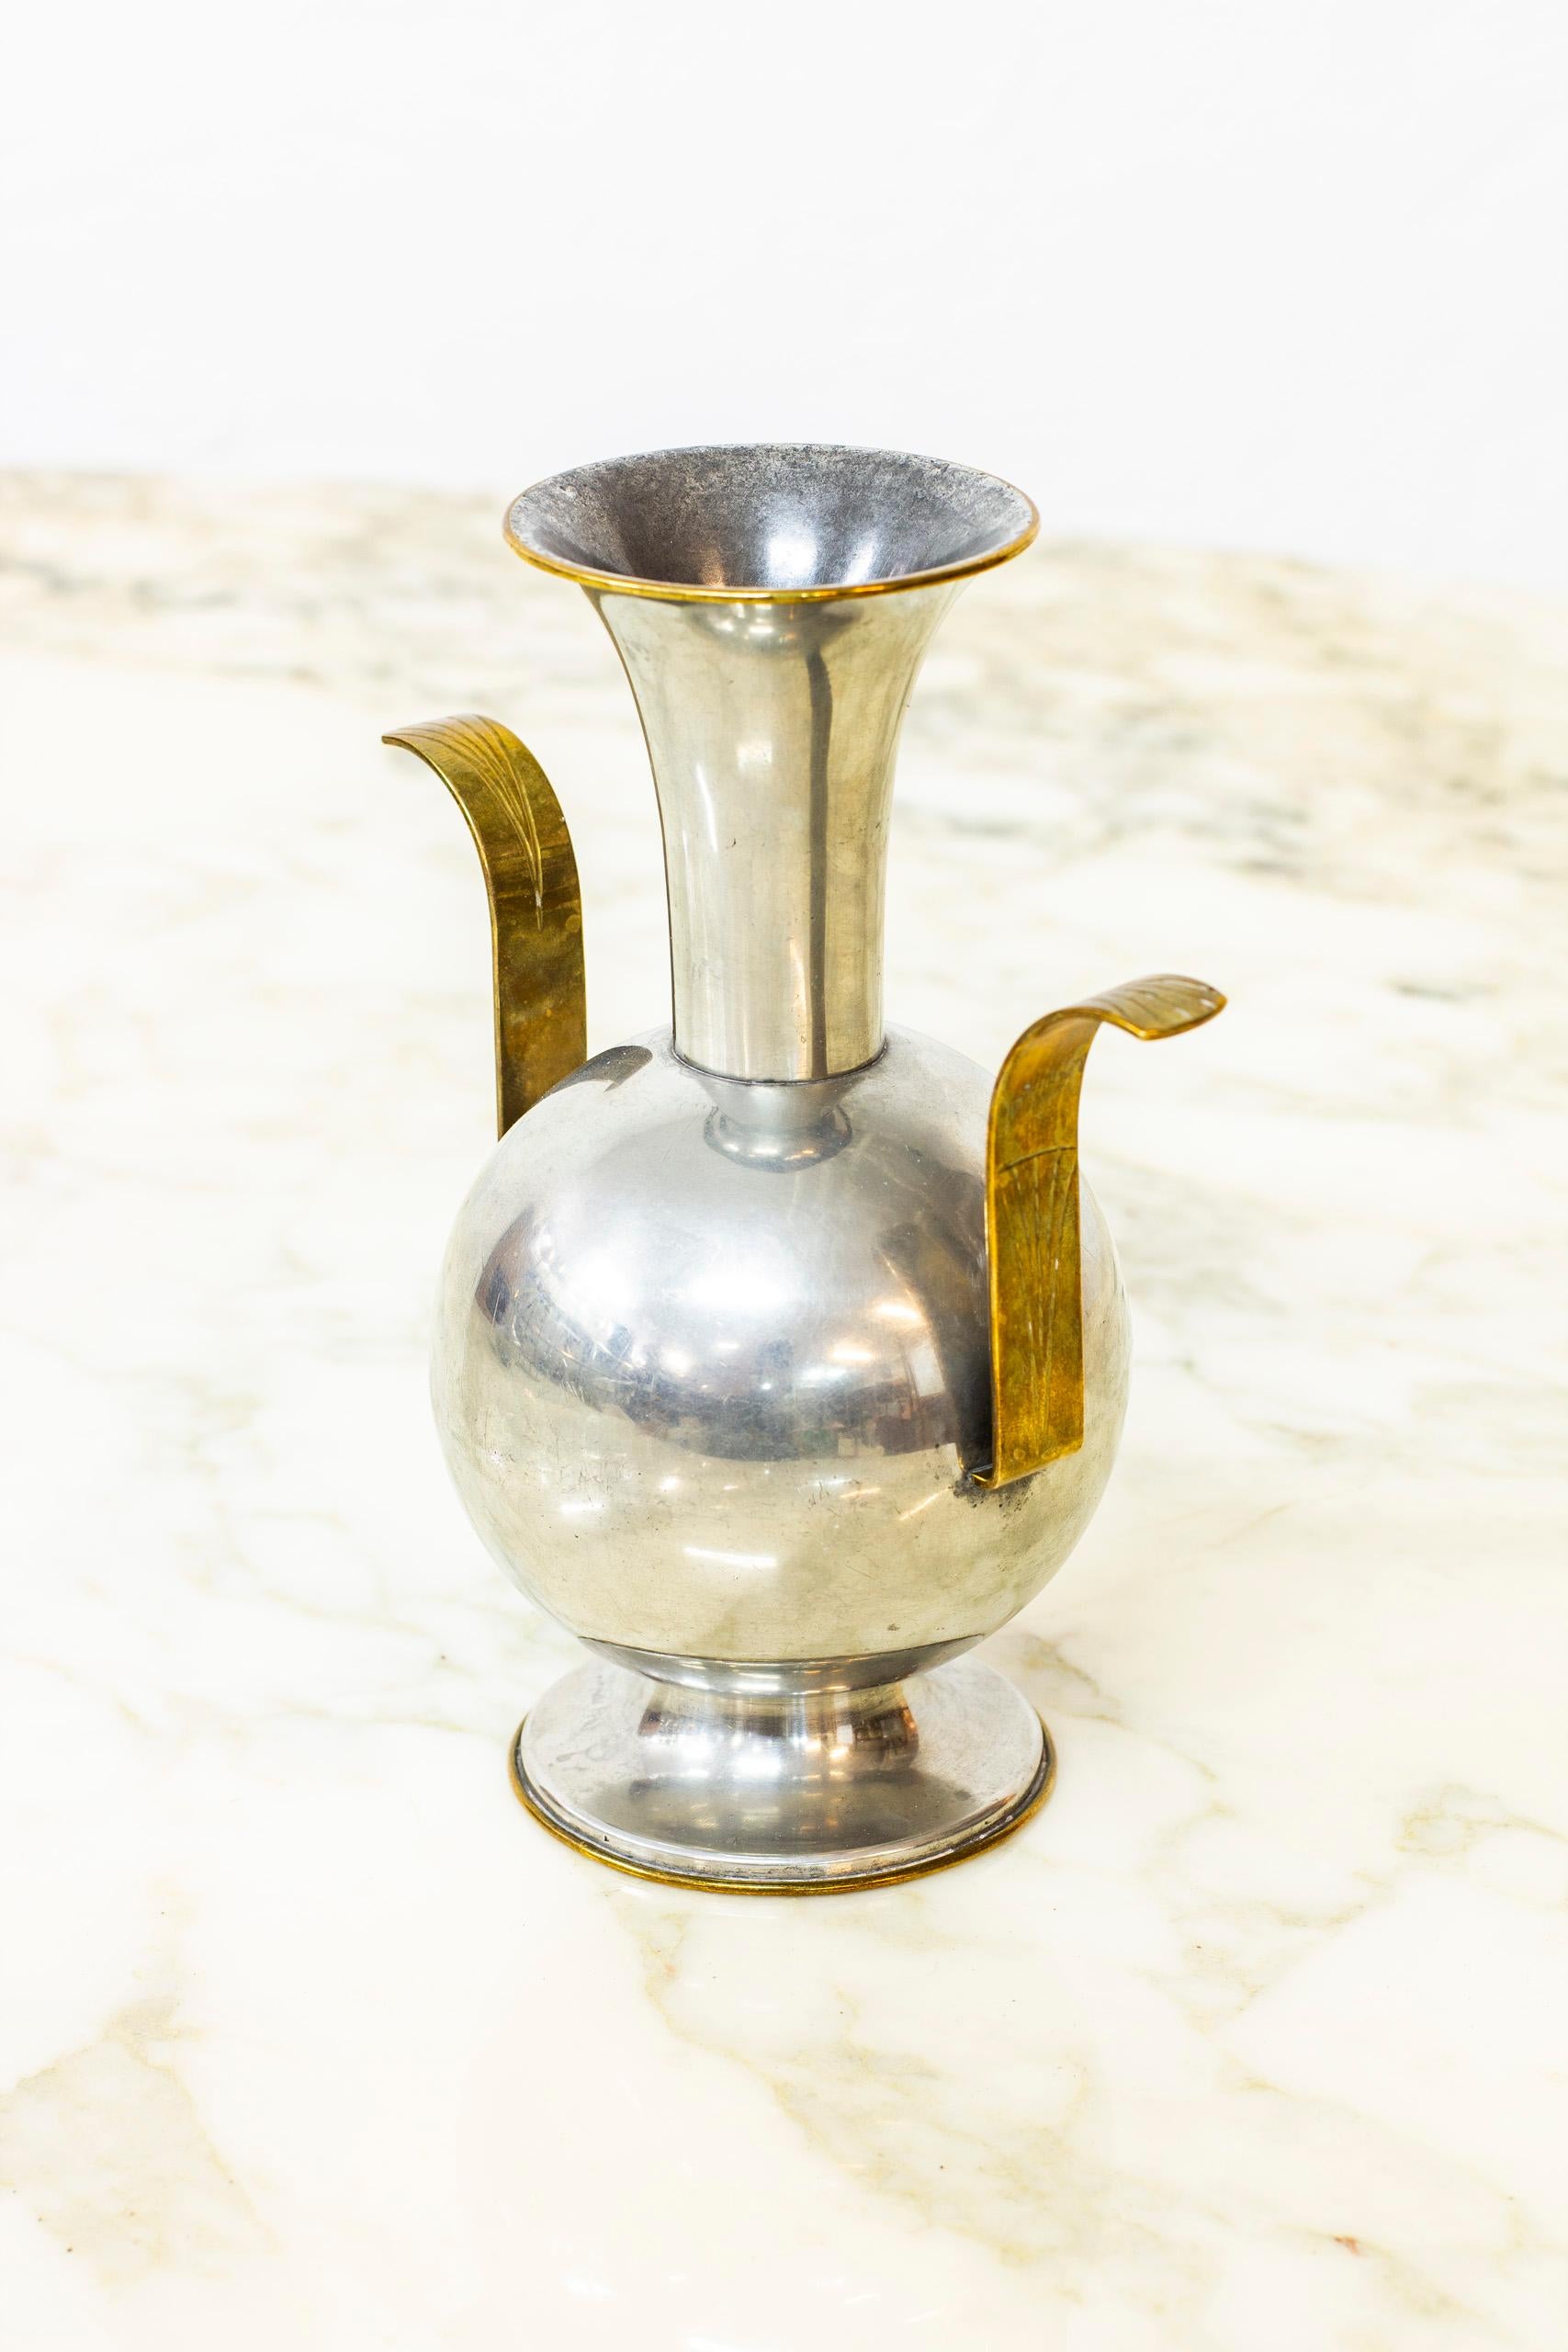 Vase designed and made by Art Smith Thorild Knutson in 1930. Made from brass and pewter. Good vintage condition with wear and patina according to age and use.